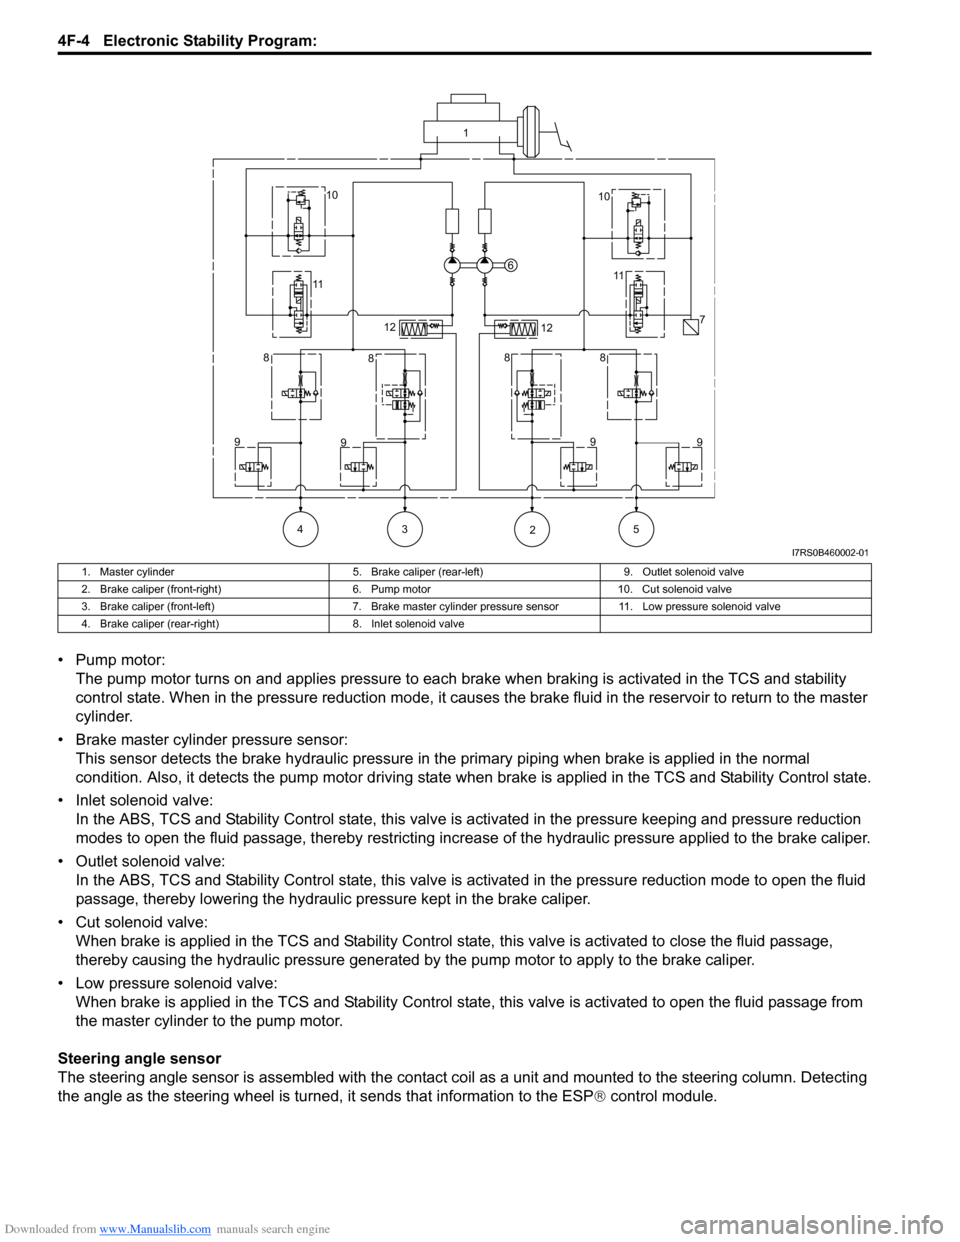 SUZUKI SWIFT 2007 2.G Service Service Manual Downloaded from www.Manualslib.com manuals search engine 4F-4 Electronic Stability Program: 
• Pump motor:The pump motor turns on and applies pressure to each brake when braking is activated in the 